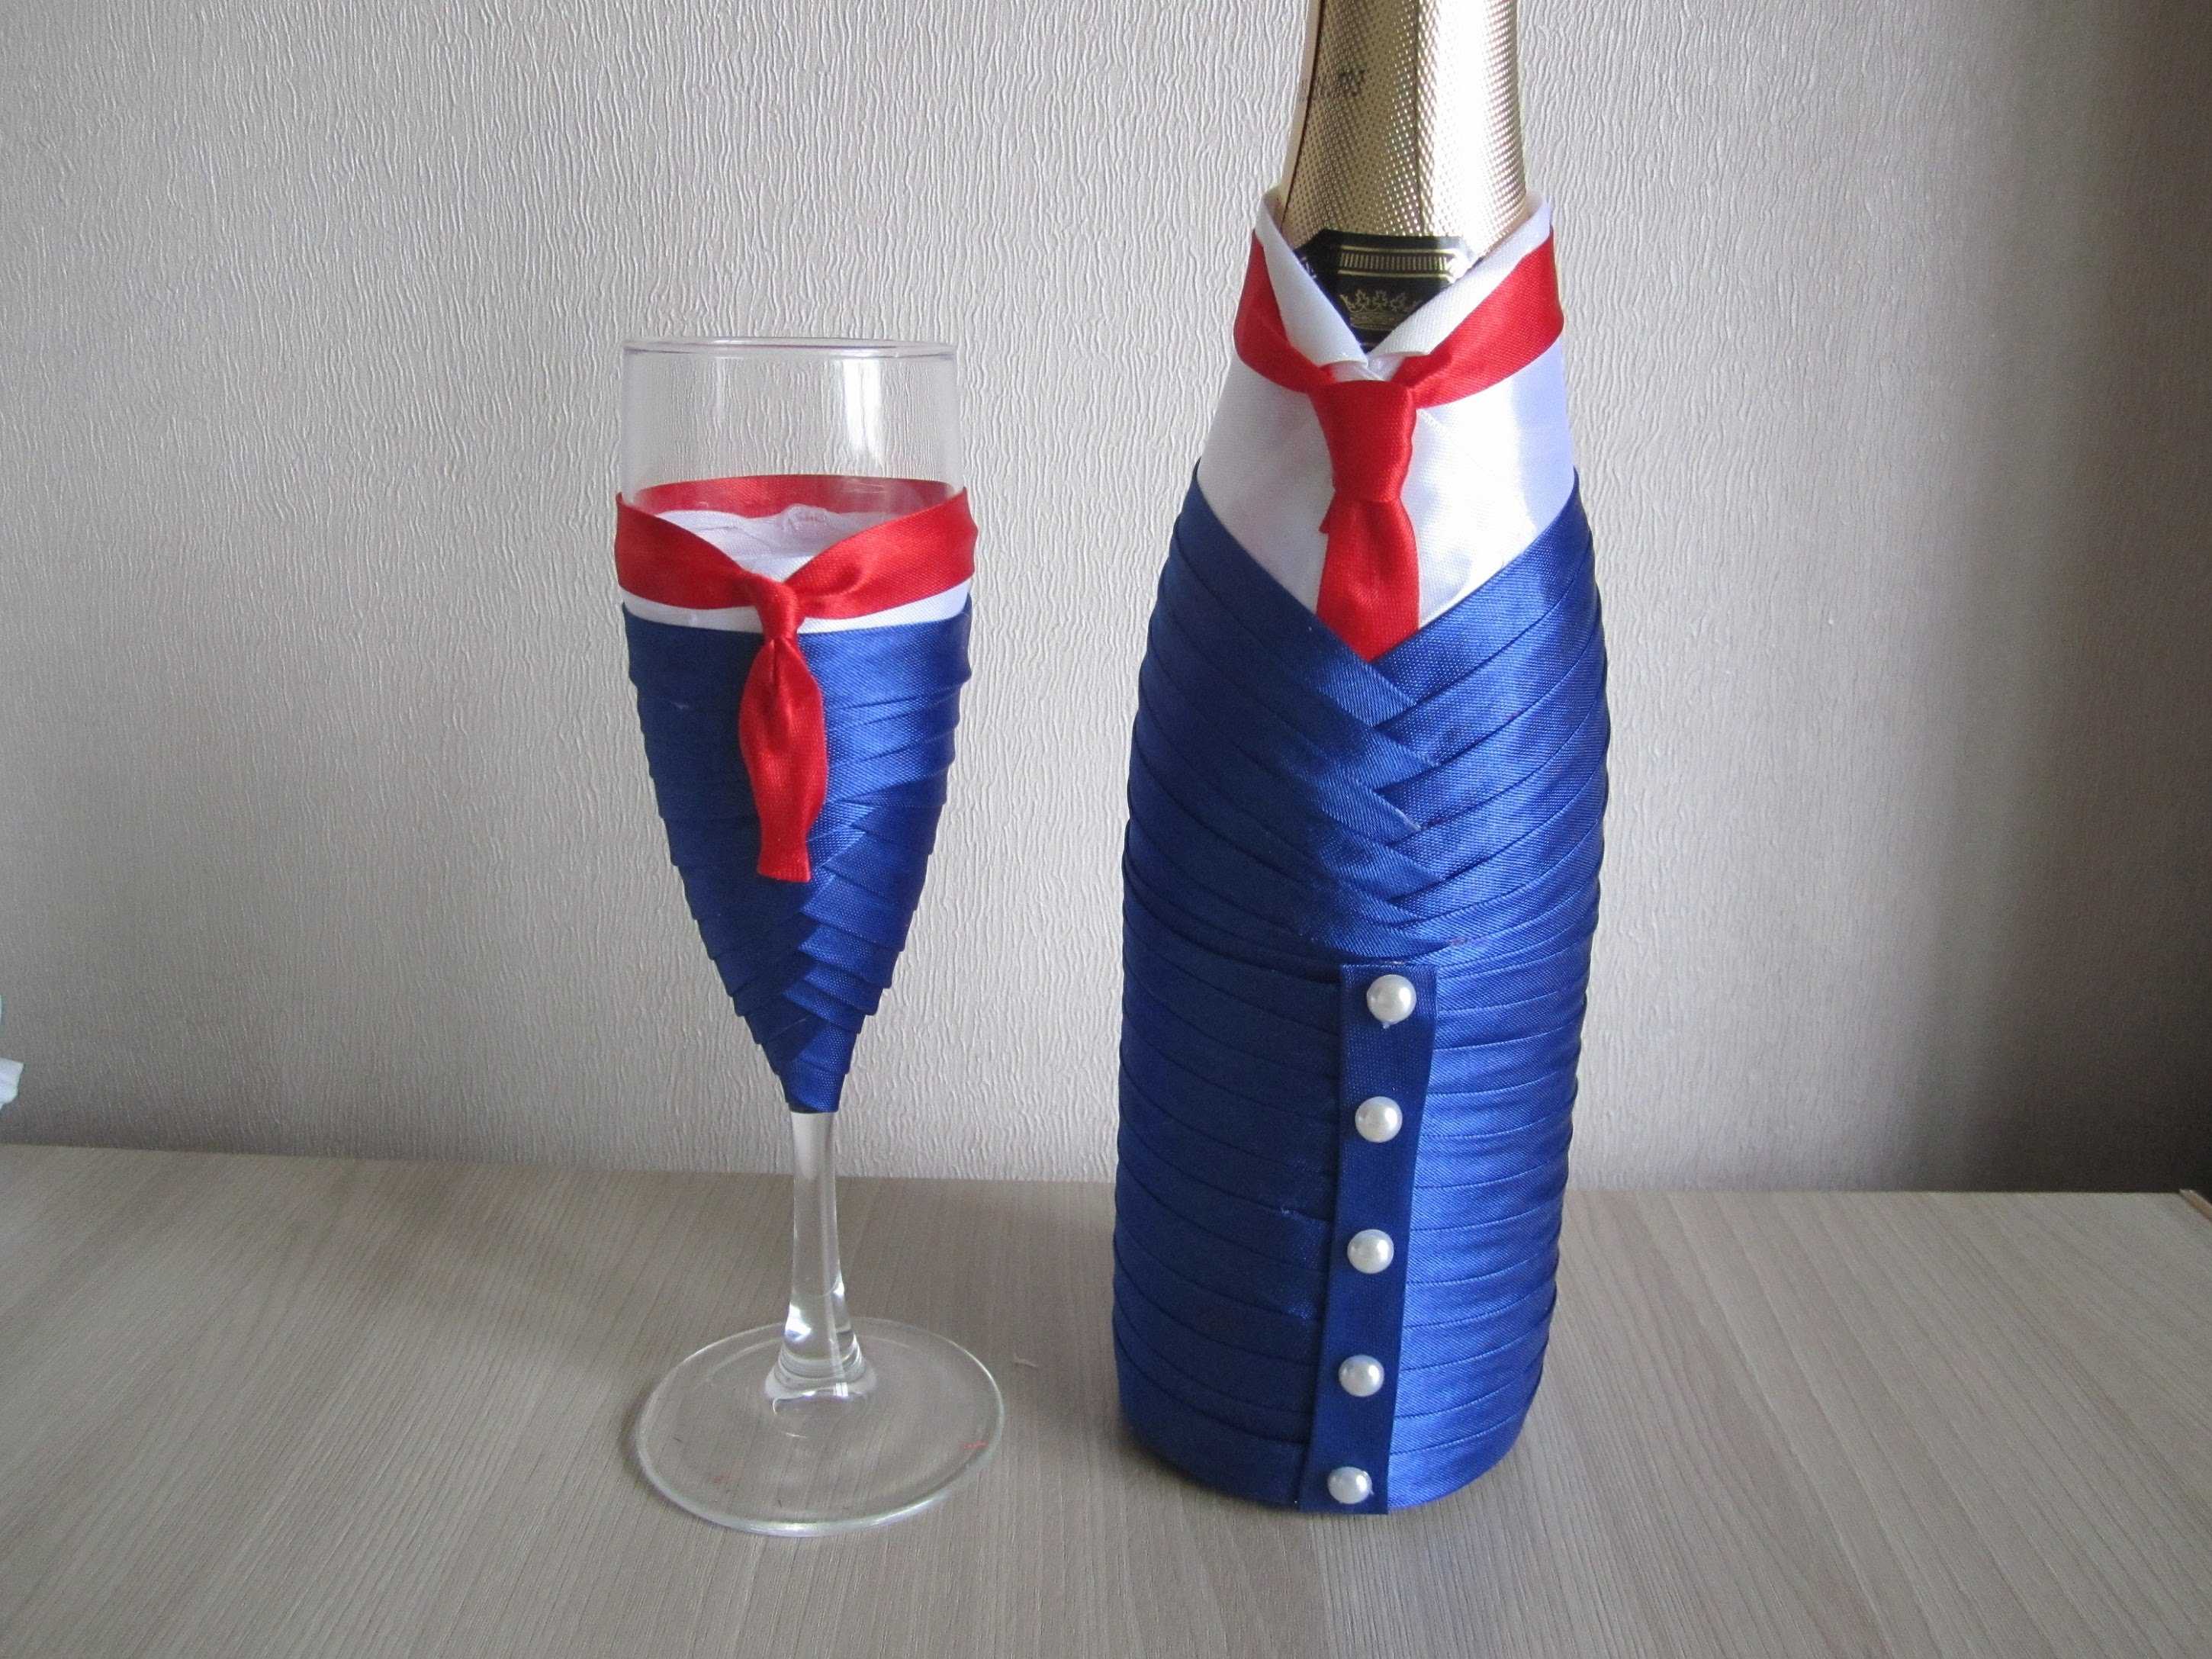 original decoration of champagne bottles with decorative ribbons